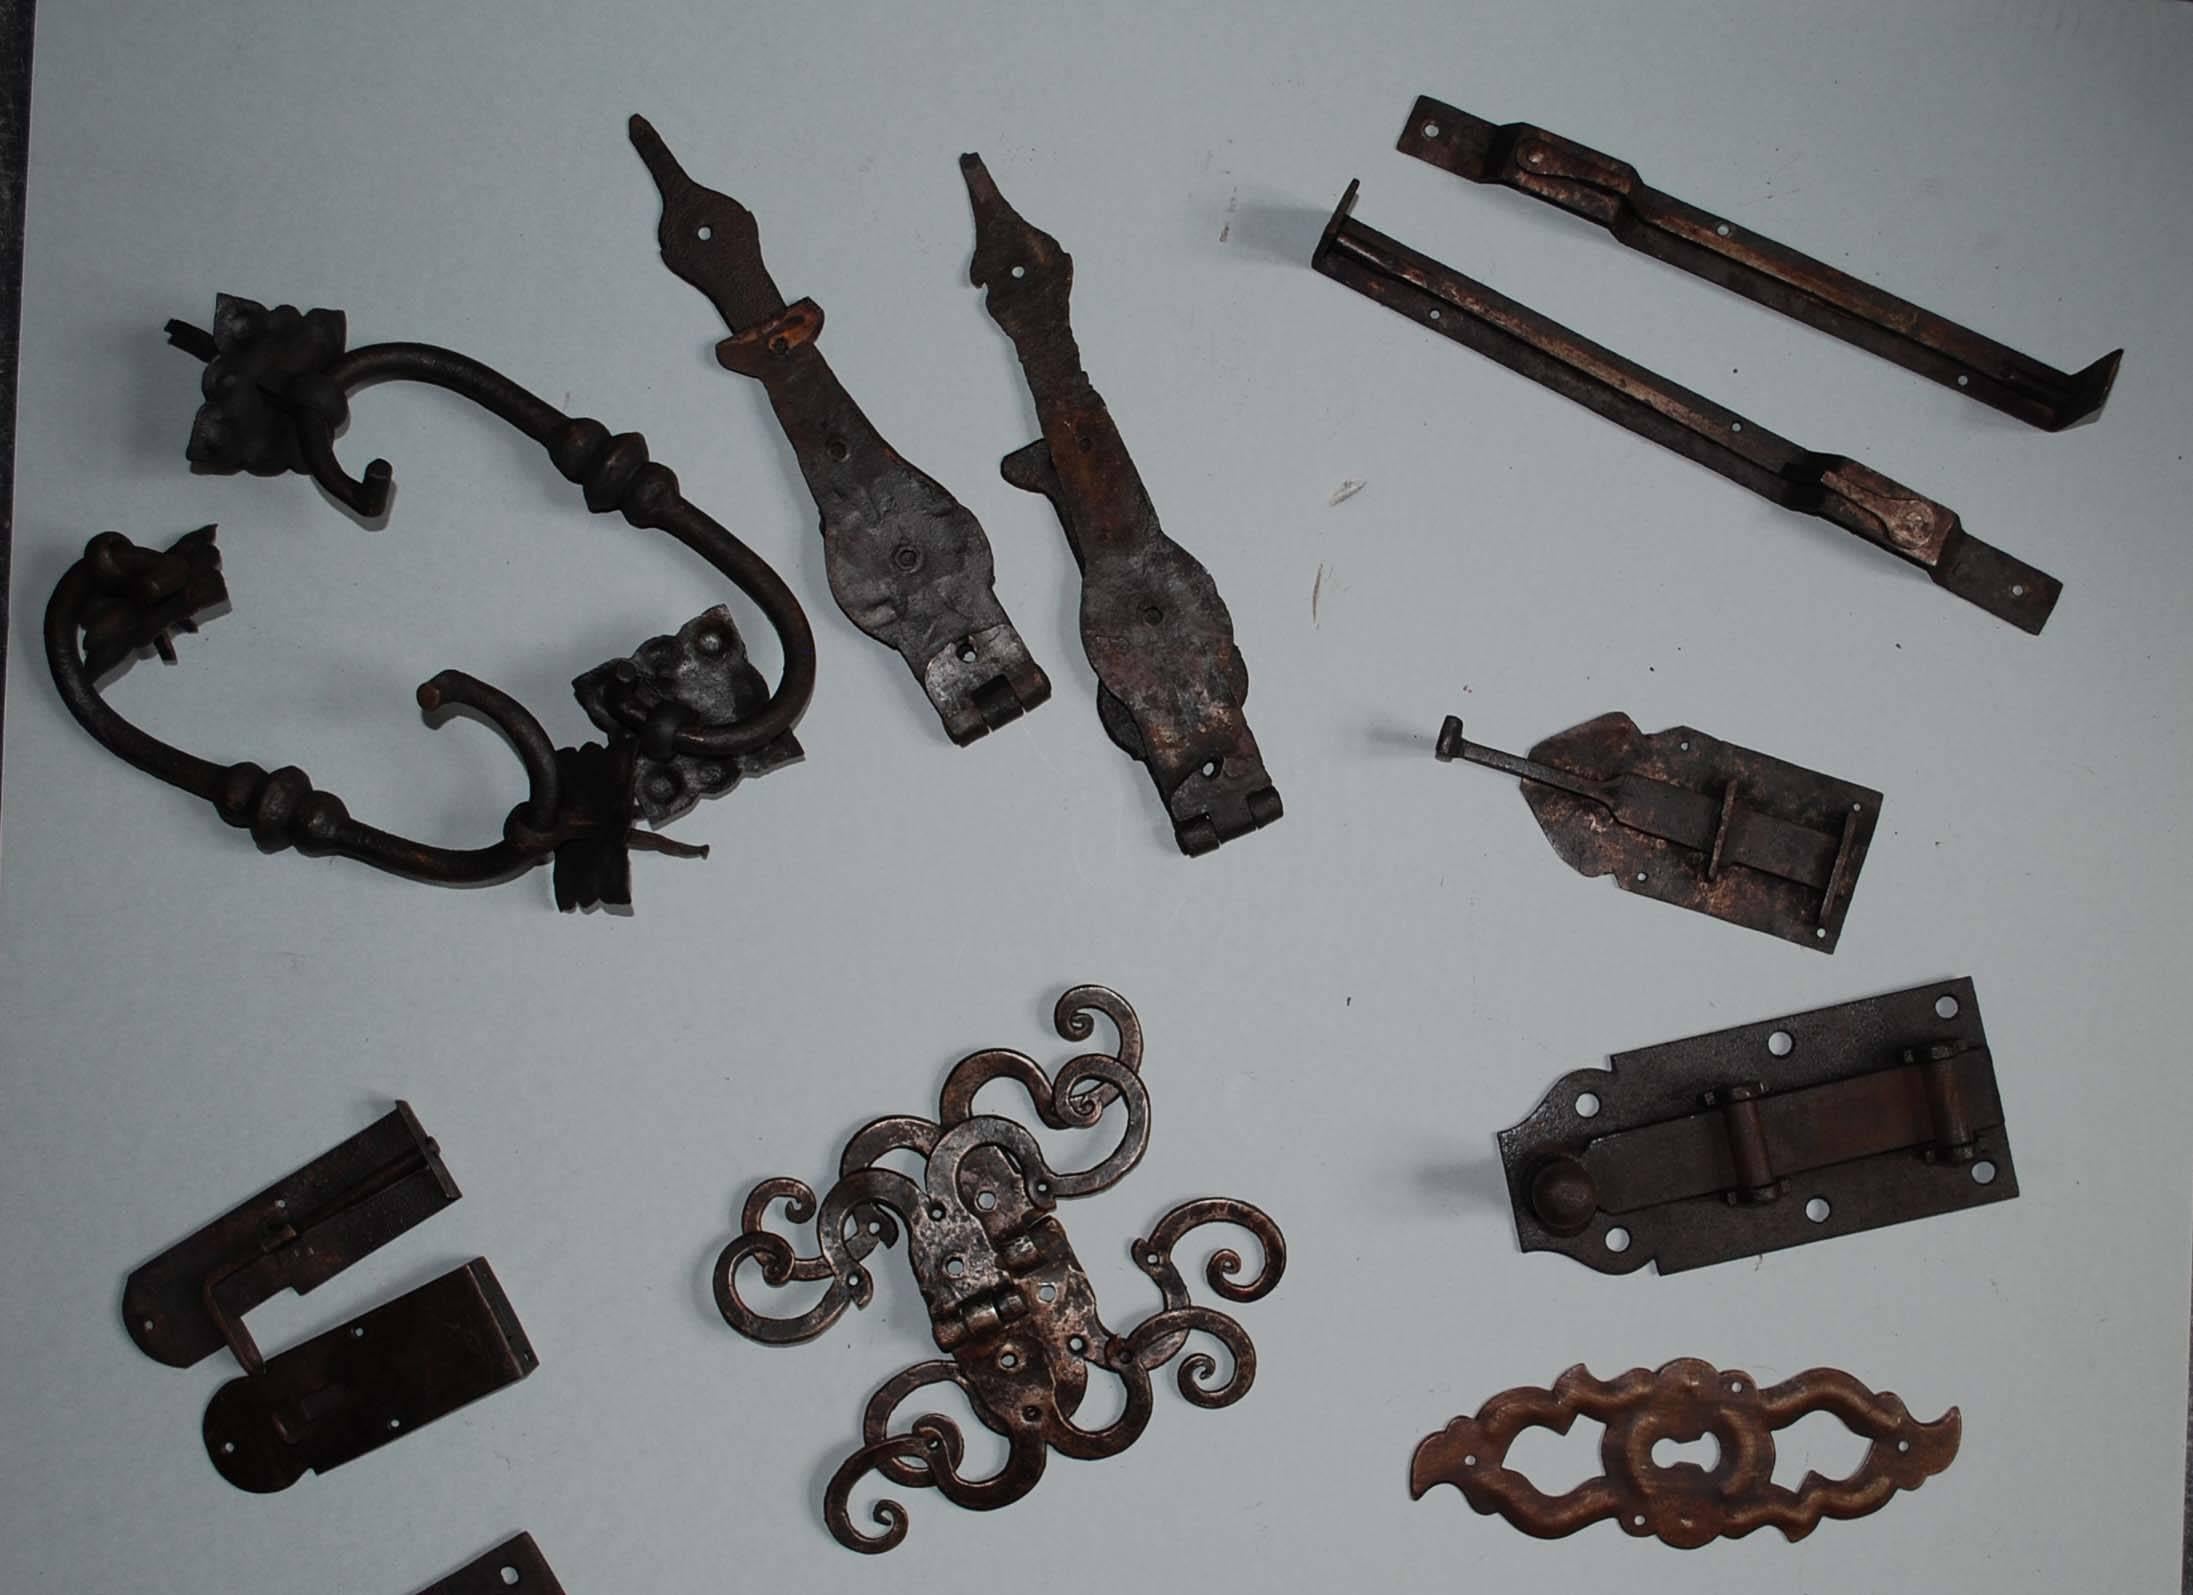 The set consists of one pair snake hinges, three pairs of strap hinges, two cabinet locks, three keyhole covers, seven slide latches and a pair of chest handles.
All items were handmade by a blacksmith.
Everything has been carefully checked and a